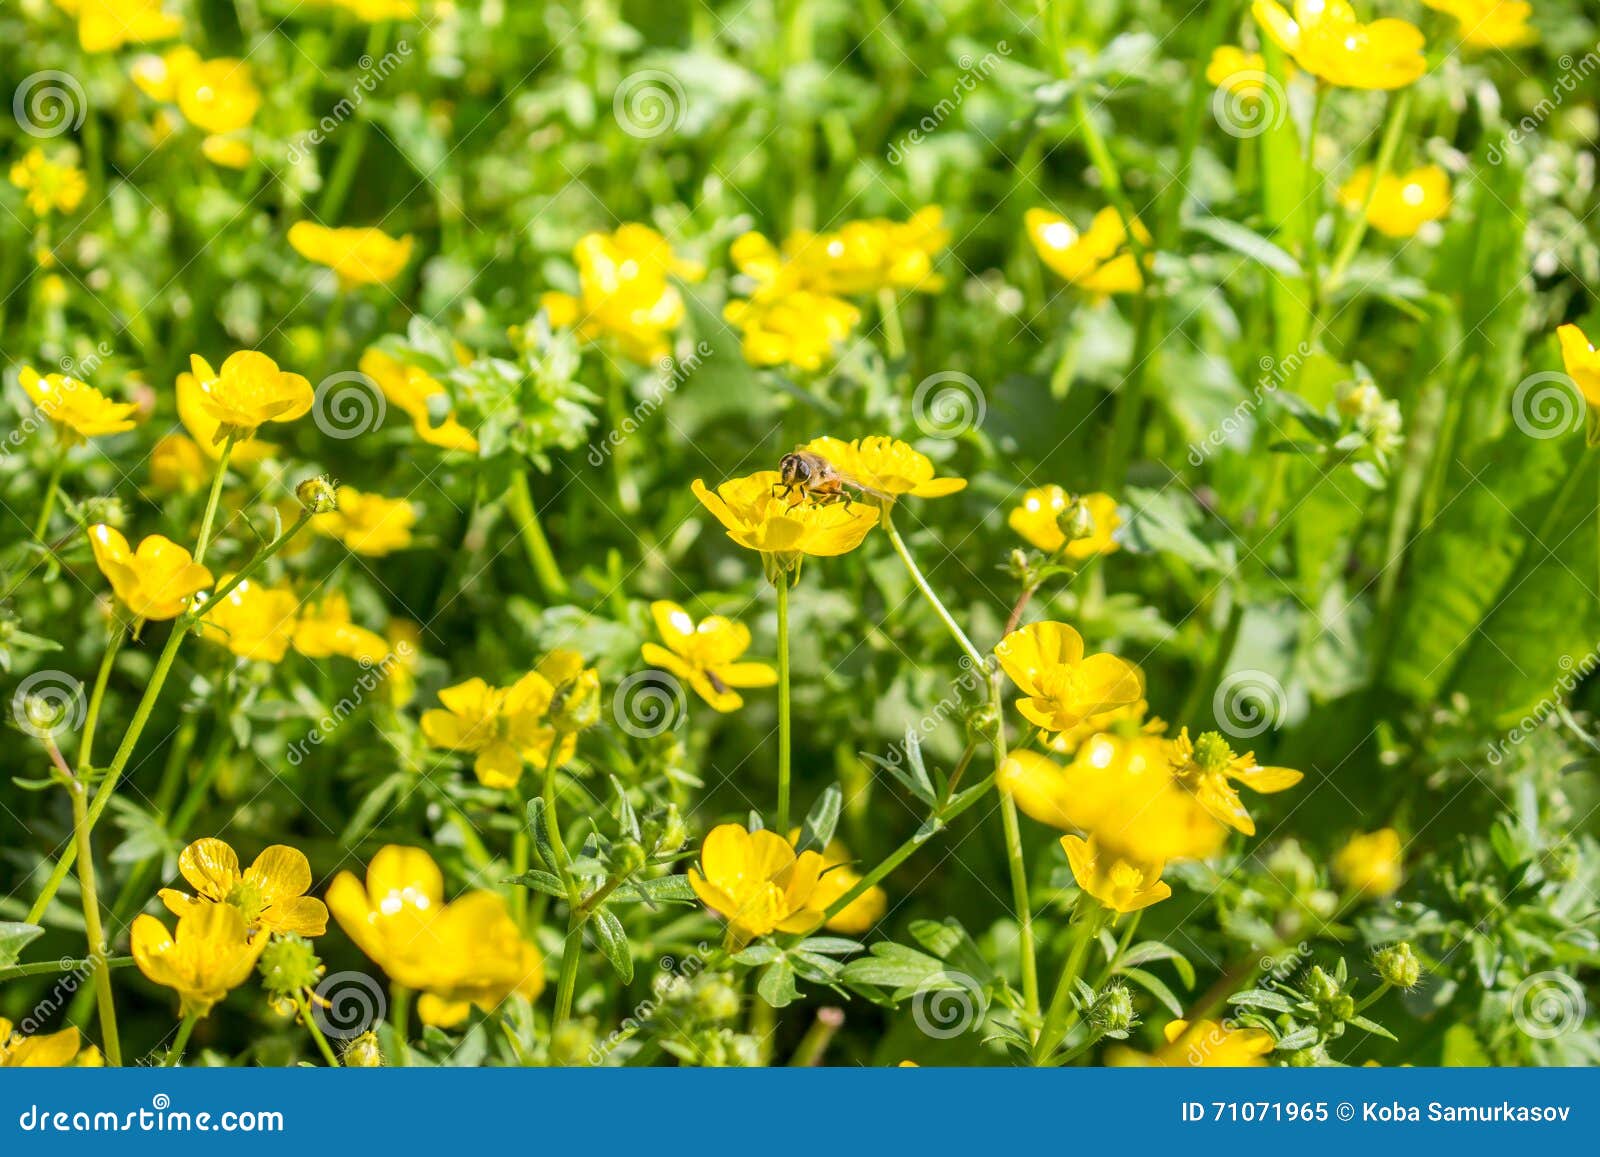 Blooming flower in spring, bee, buttercup, crowfoot,. Blooming flower in spring, buttercup, crowfoot, ranunculus